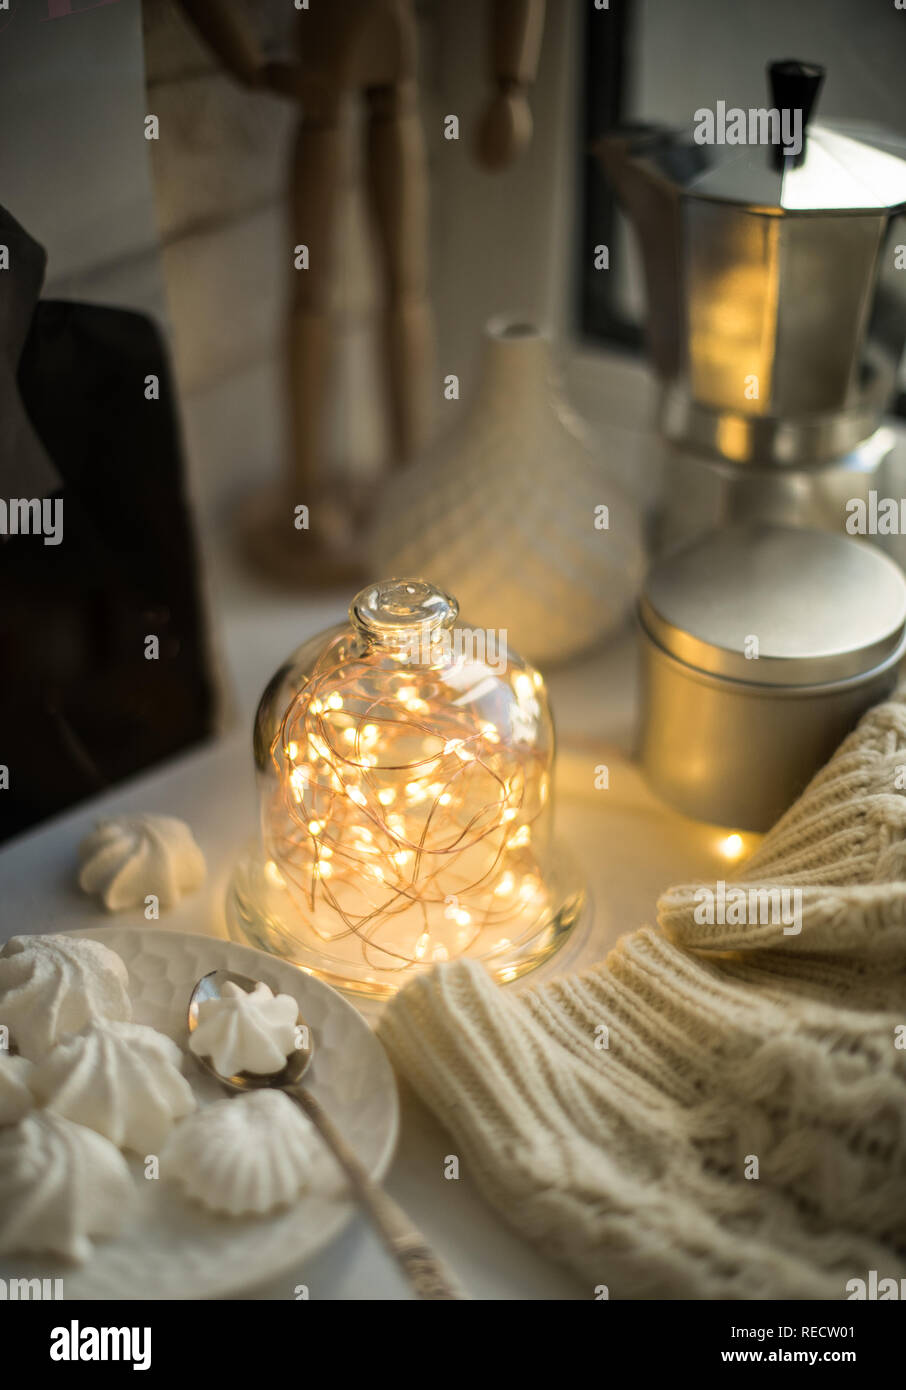 Cozy winter interior styling and decor, warm string lights in bell jar Stock Photo